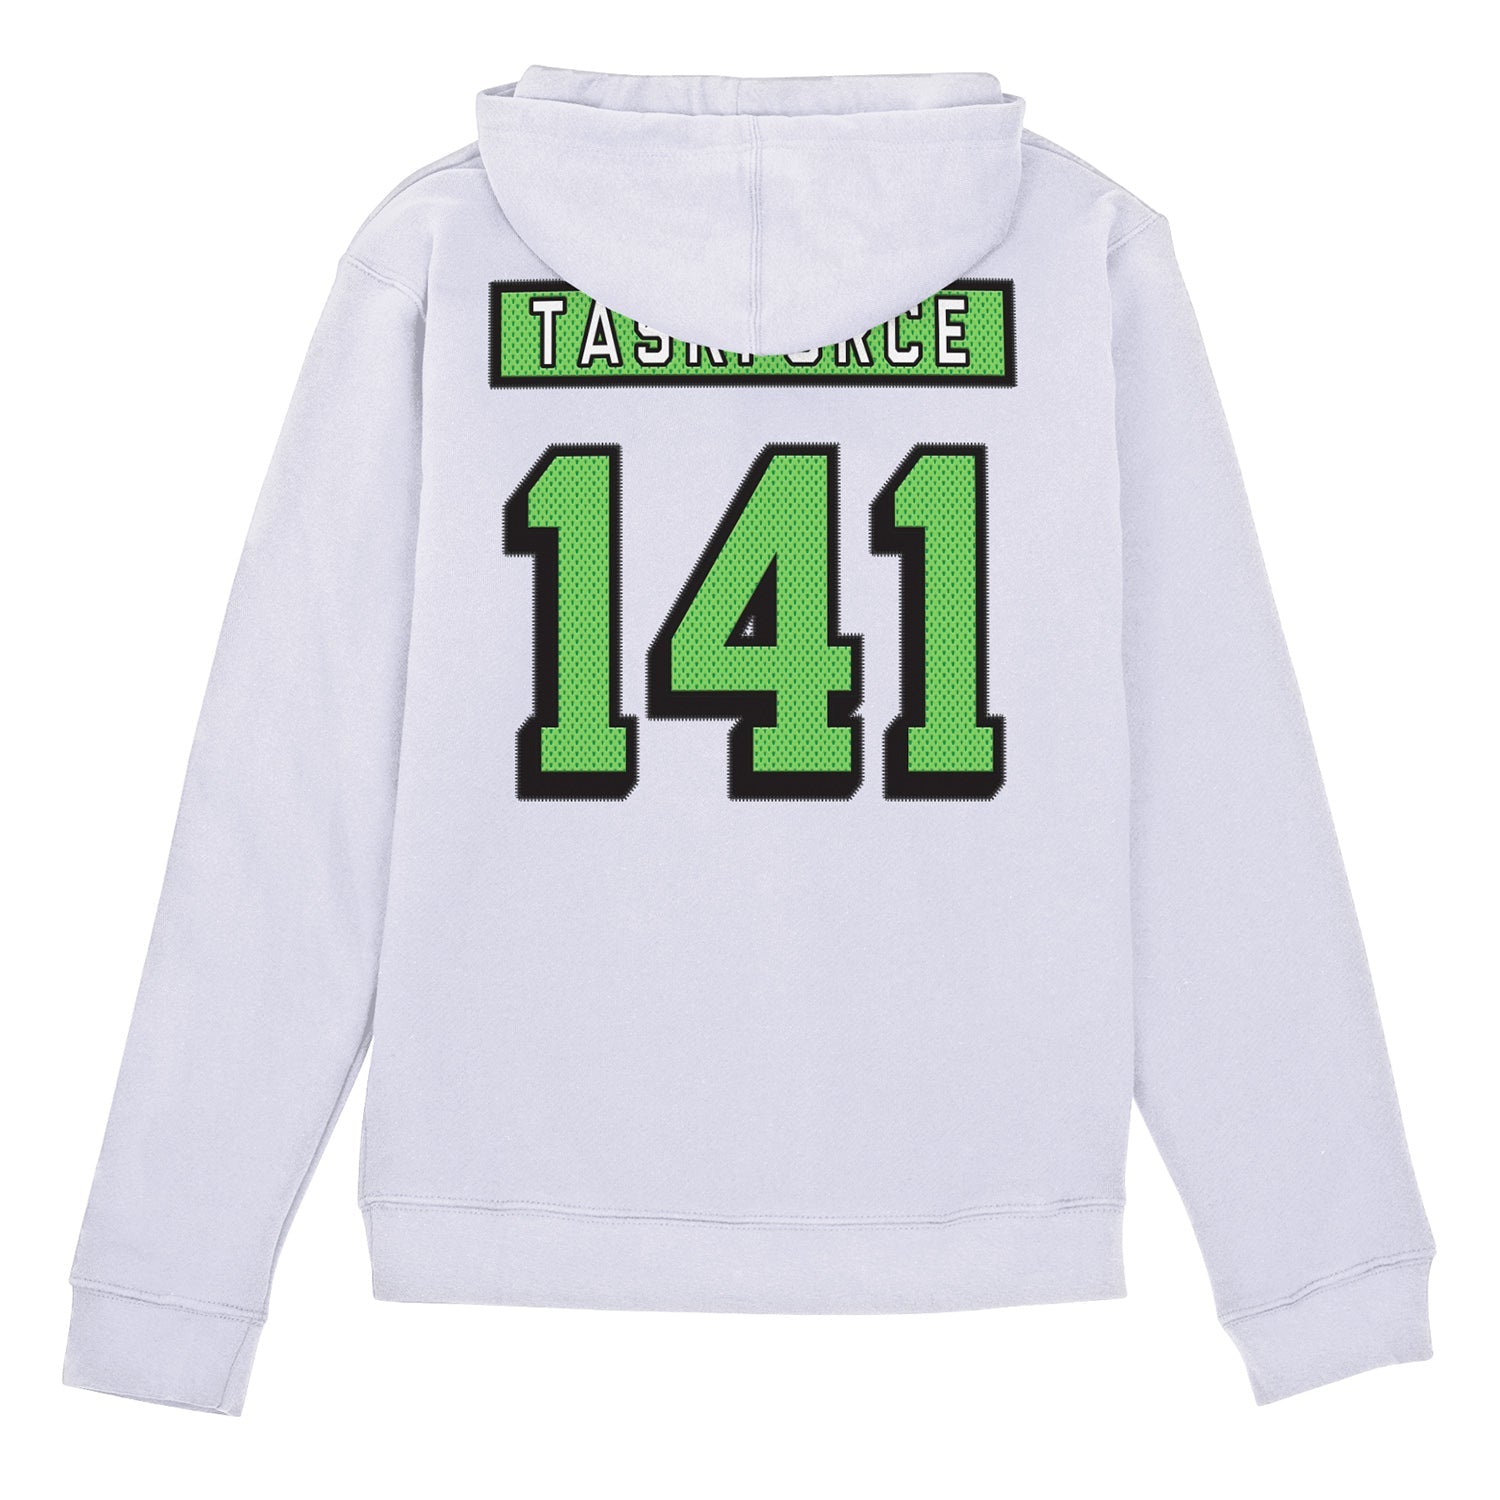 Call of Duty Hockey Task Force 141 White Hoodie - Back View